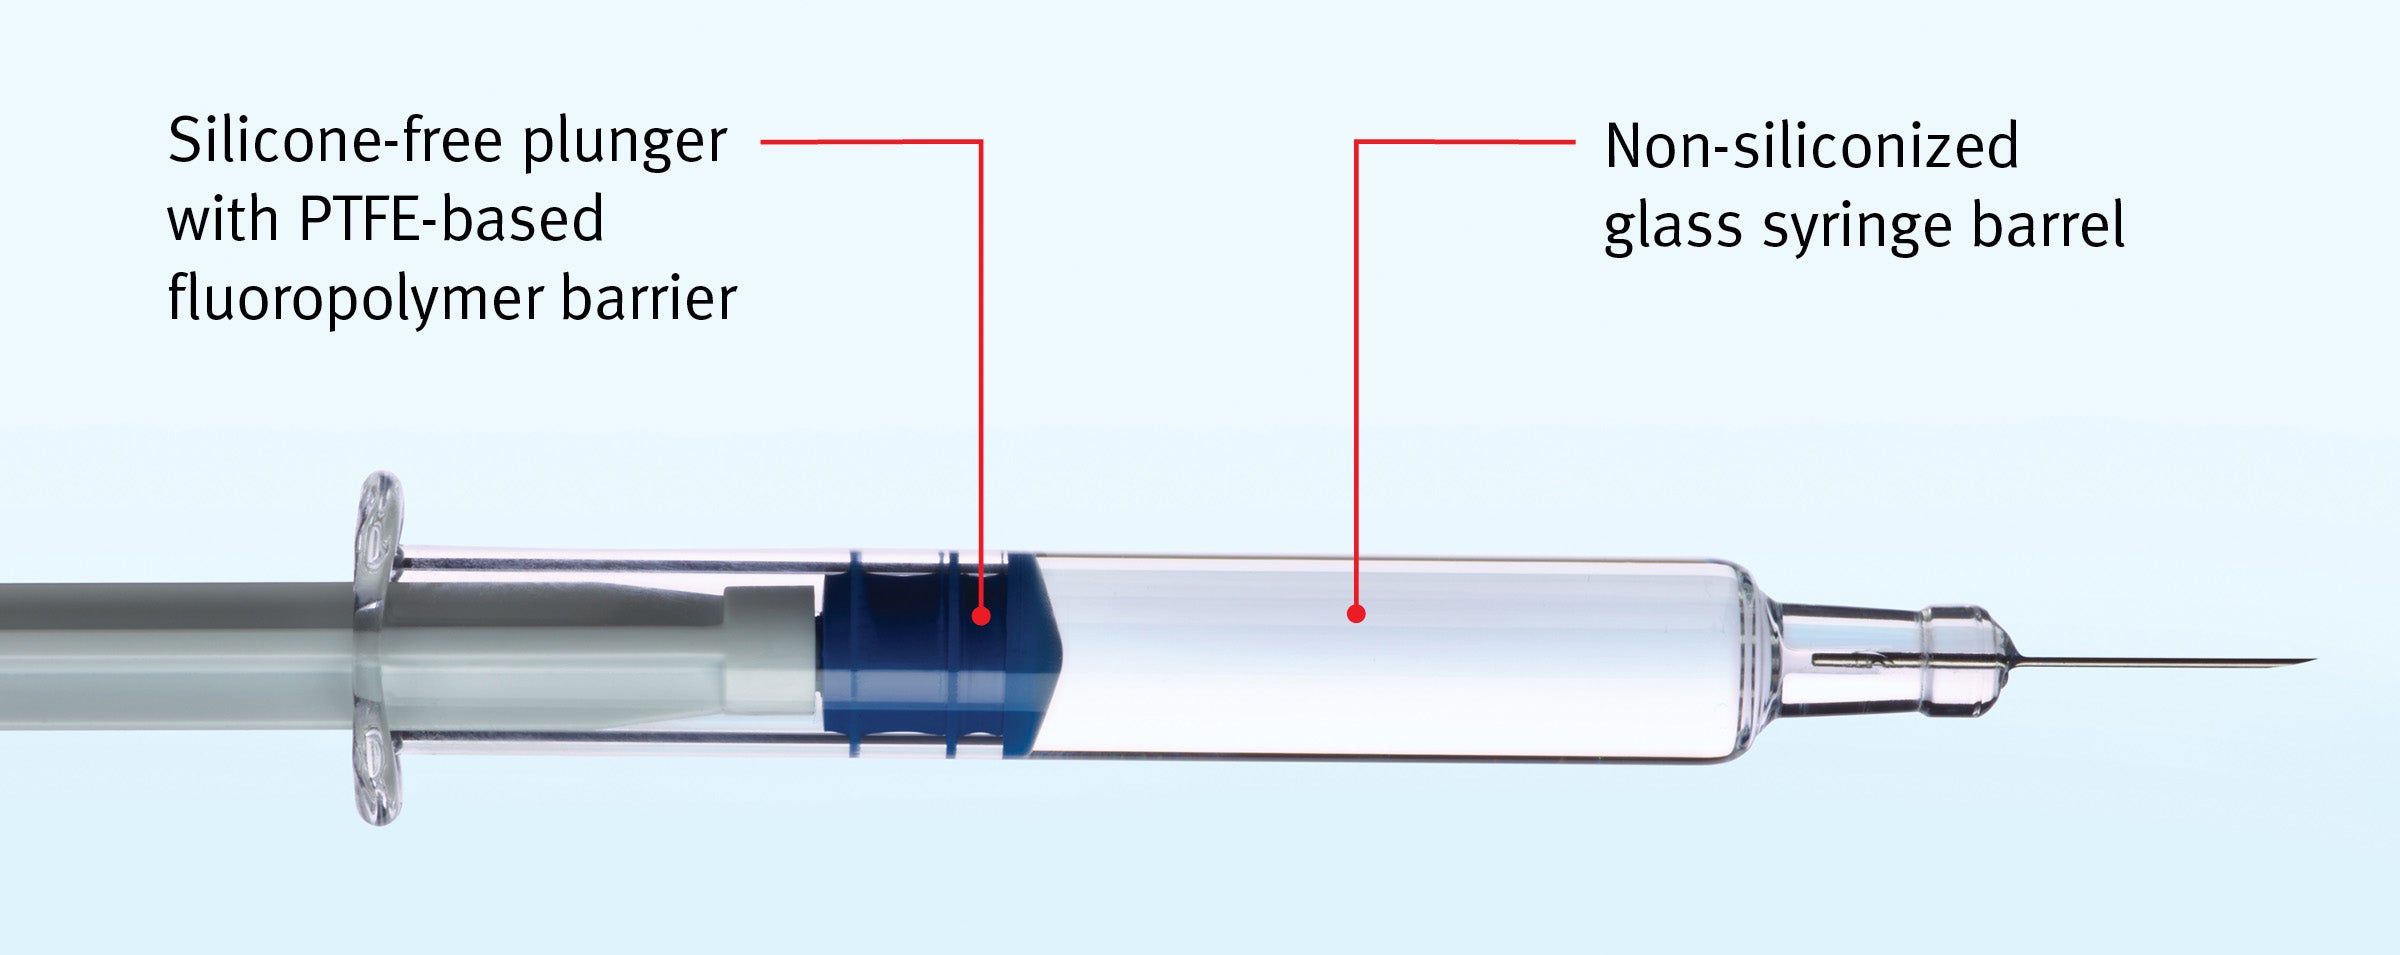 Silicone-free plunger with PTFE-based fluoropolymer barrer, non-siliconized glass syringe barrel